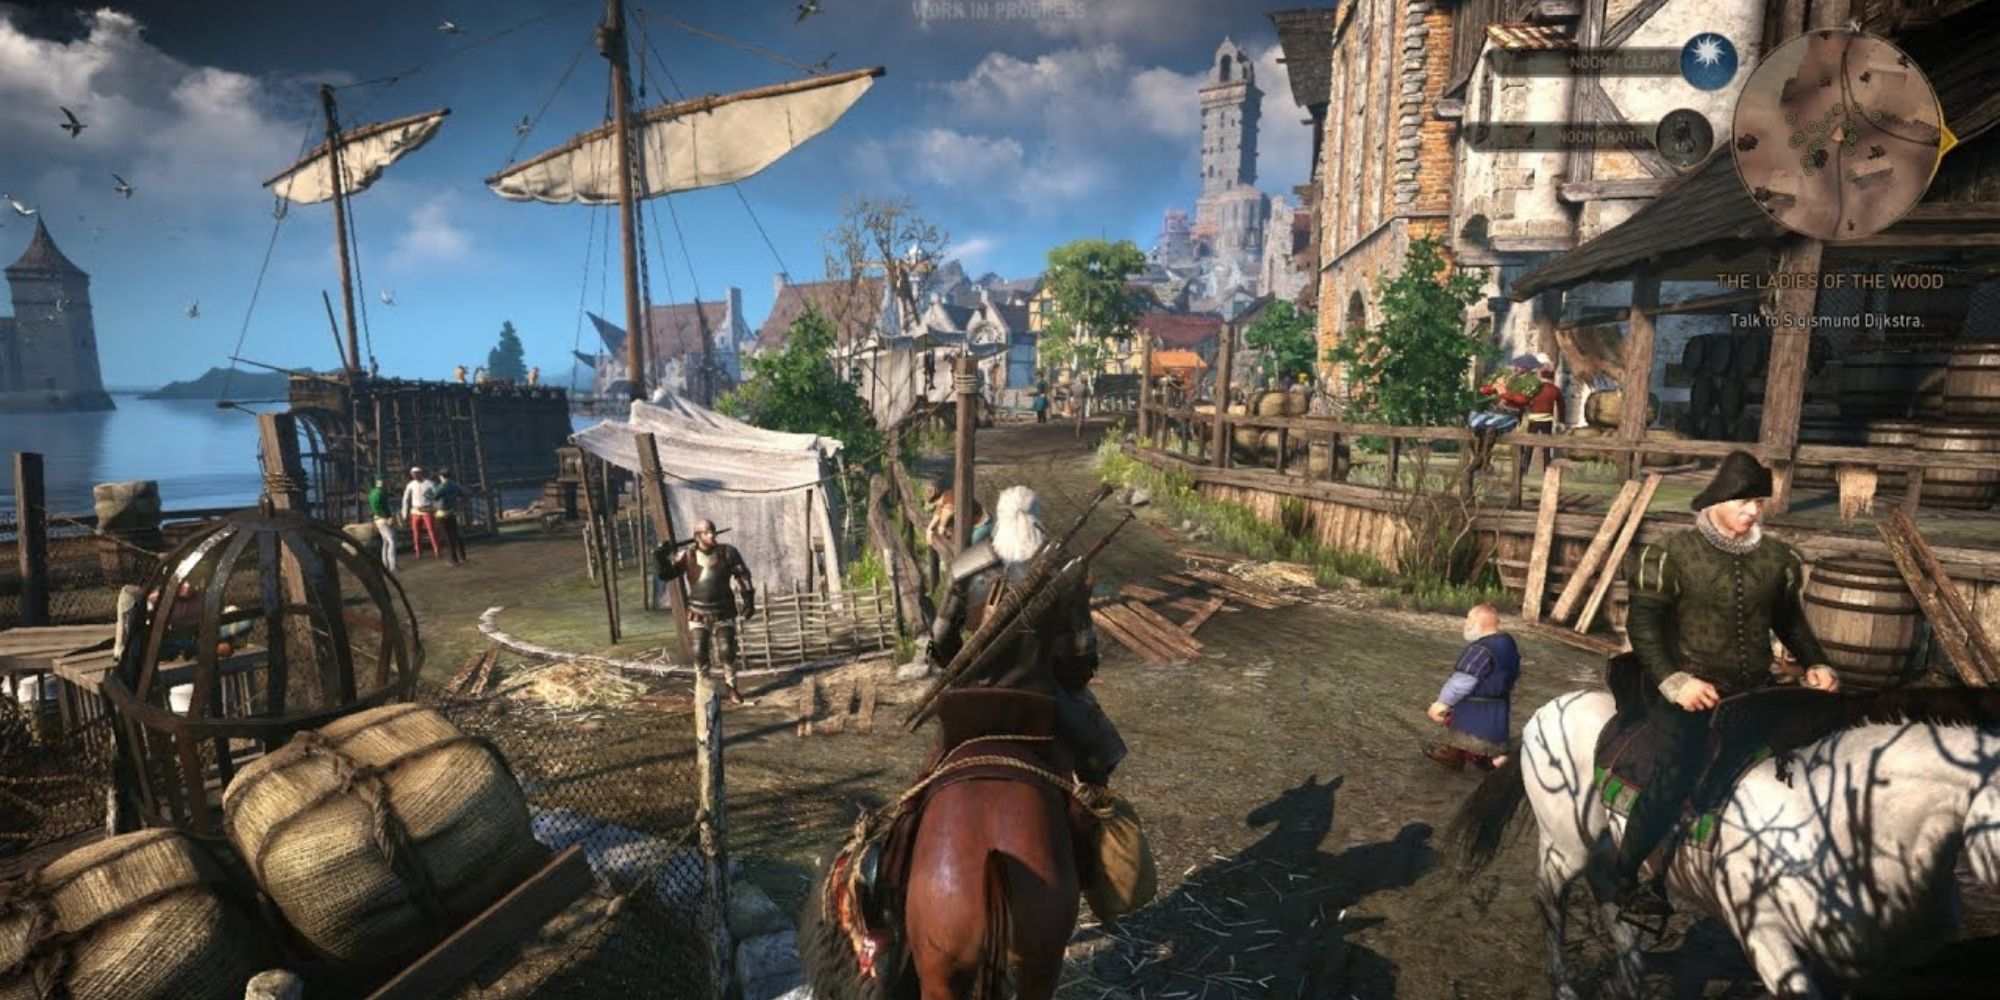 Geralt Riding A Horse Through City Docks in the witcher 3